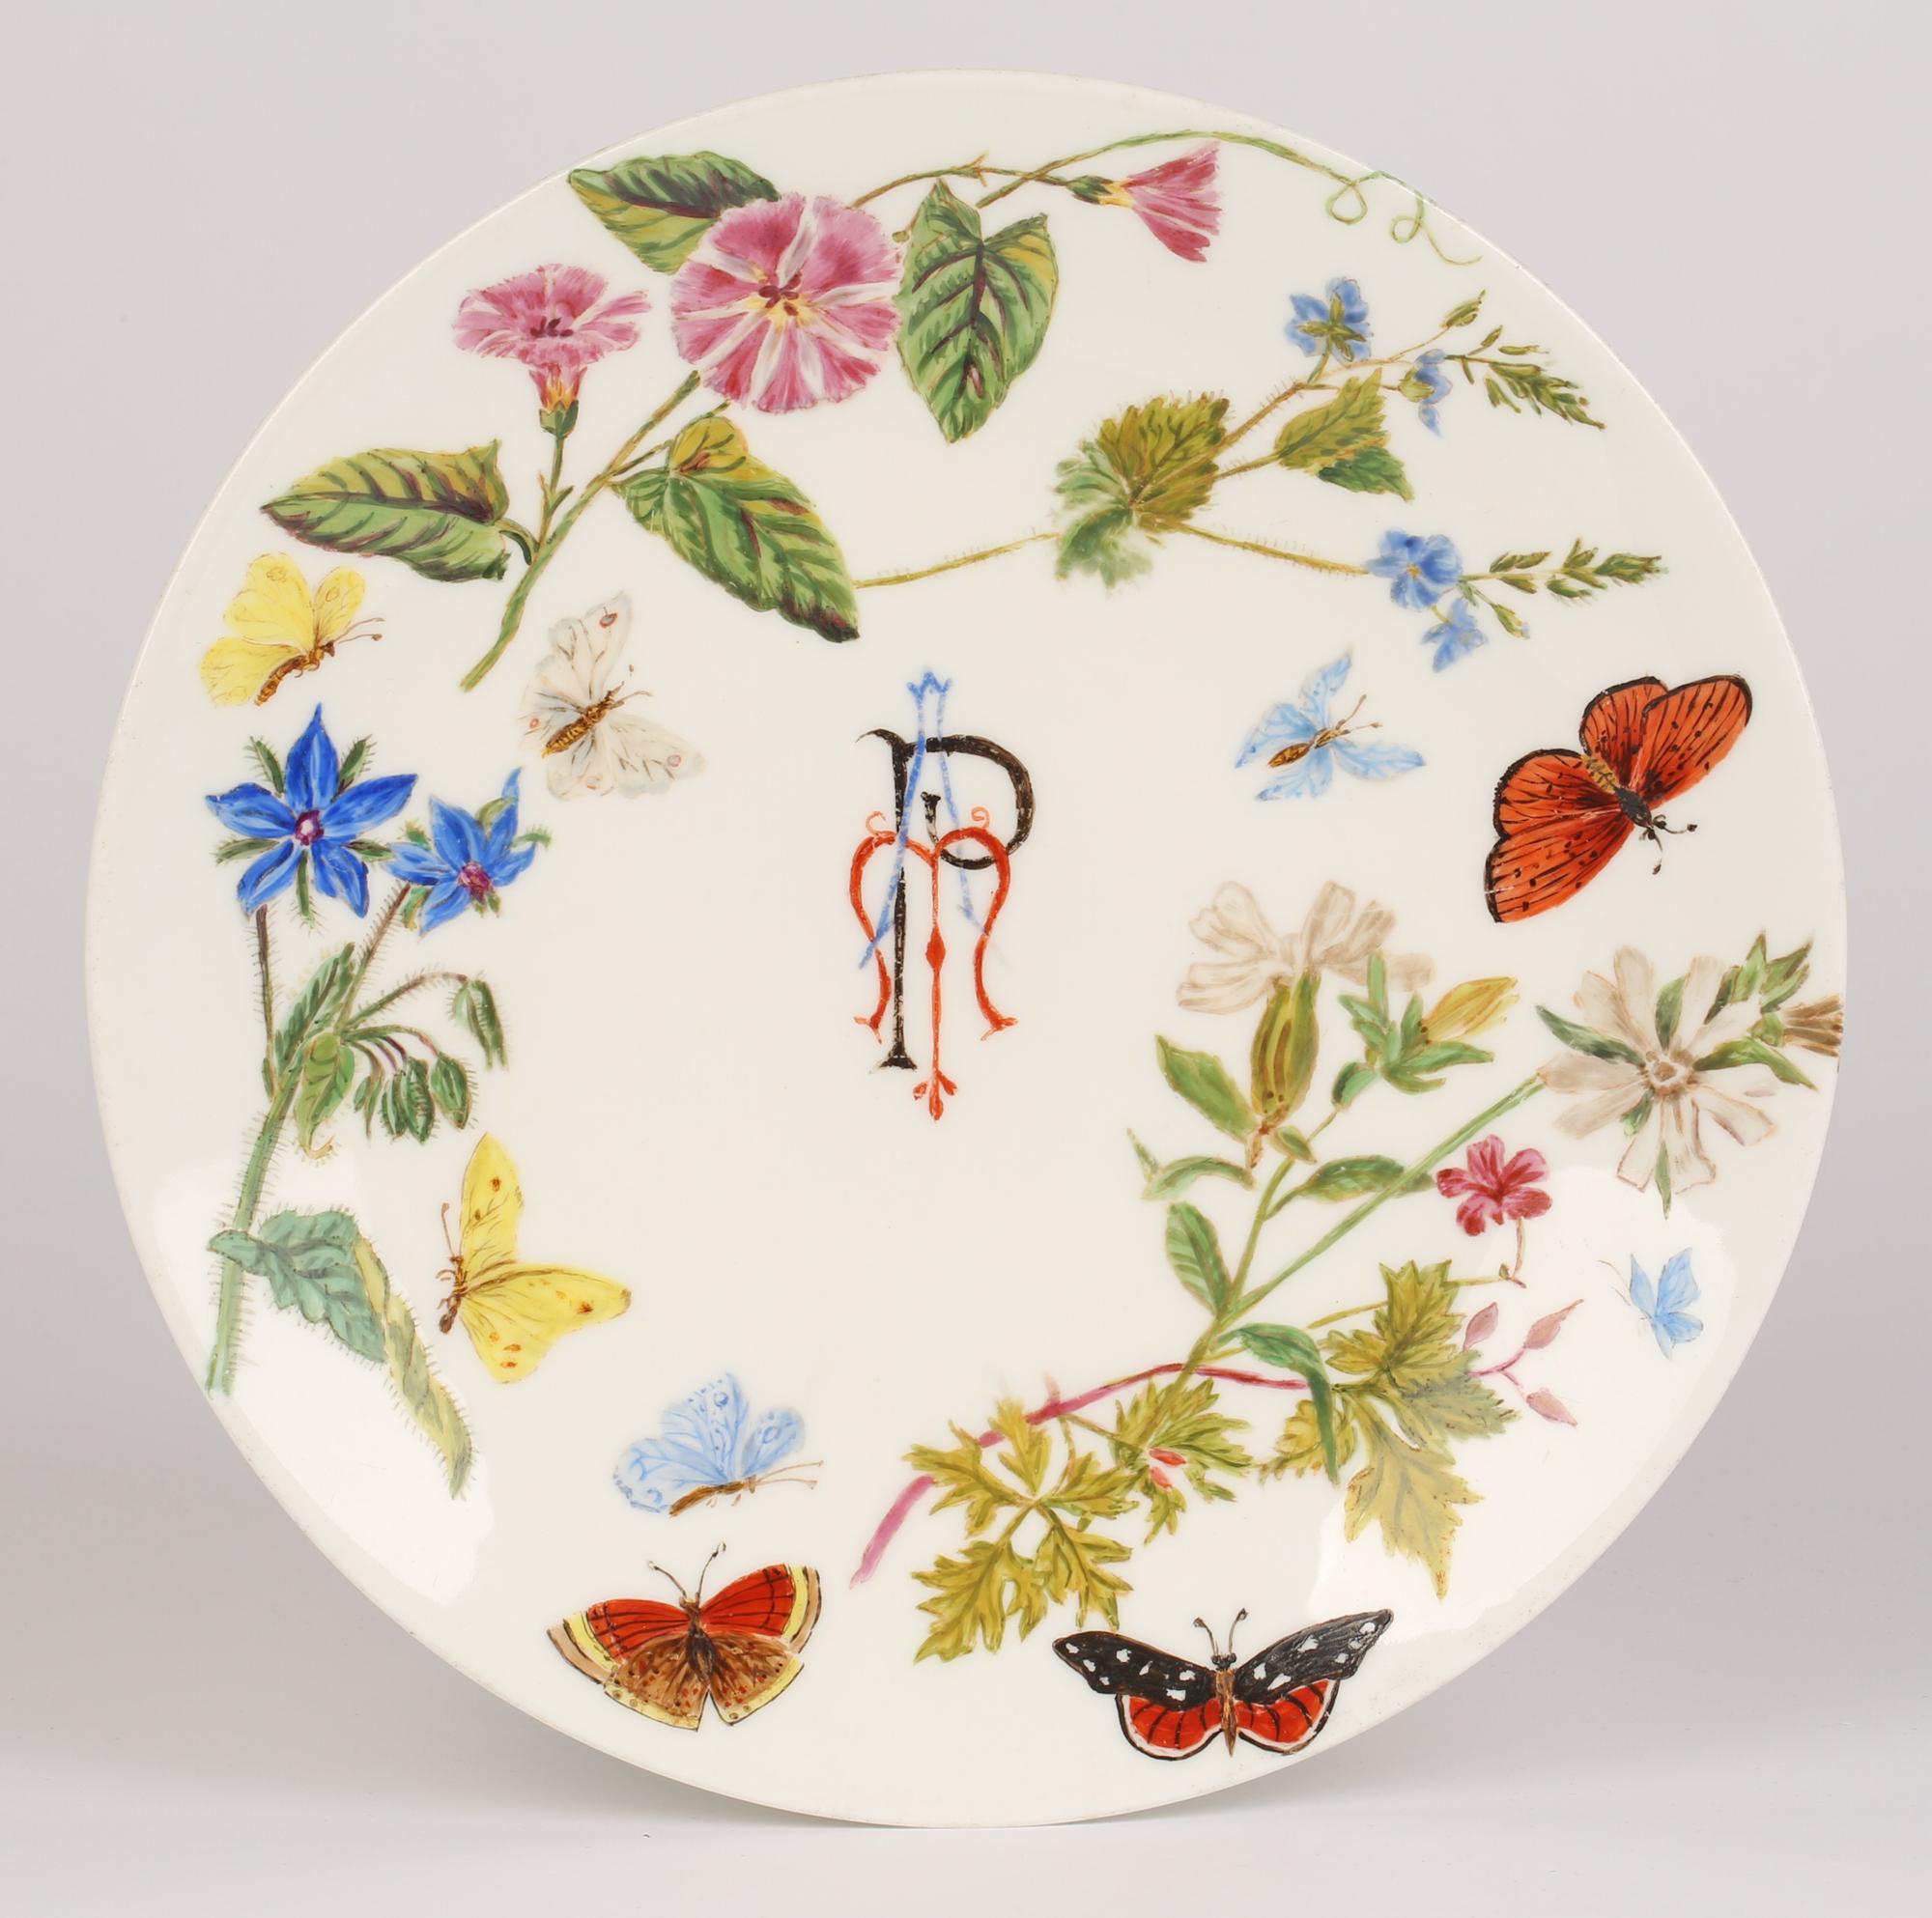 Minton Porcelain Hand-Painted Blank Cabinet Plate Signed AMB, 1890 For Sale 8